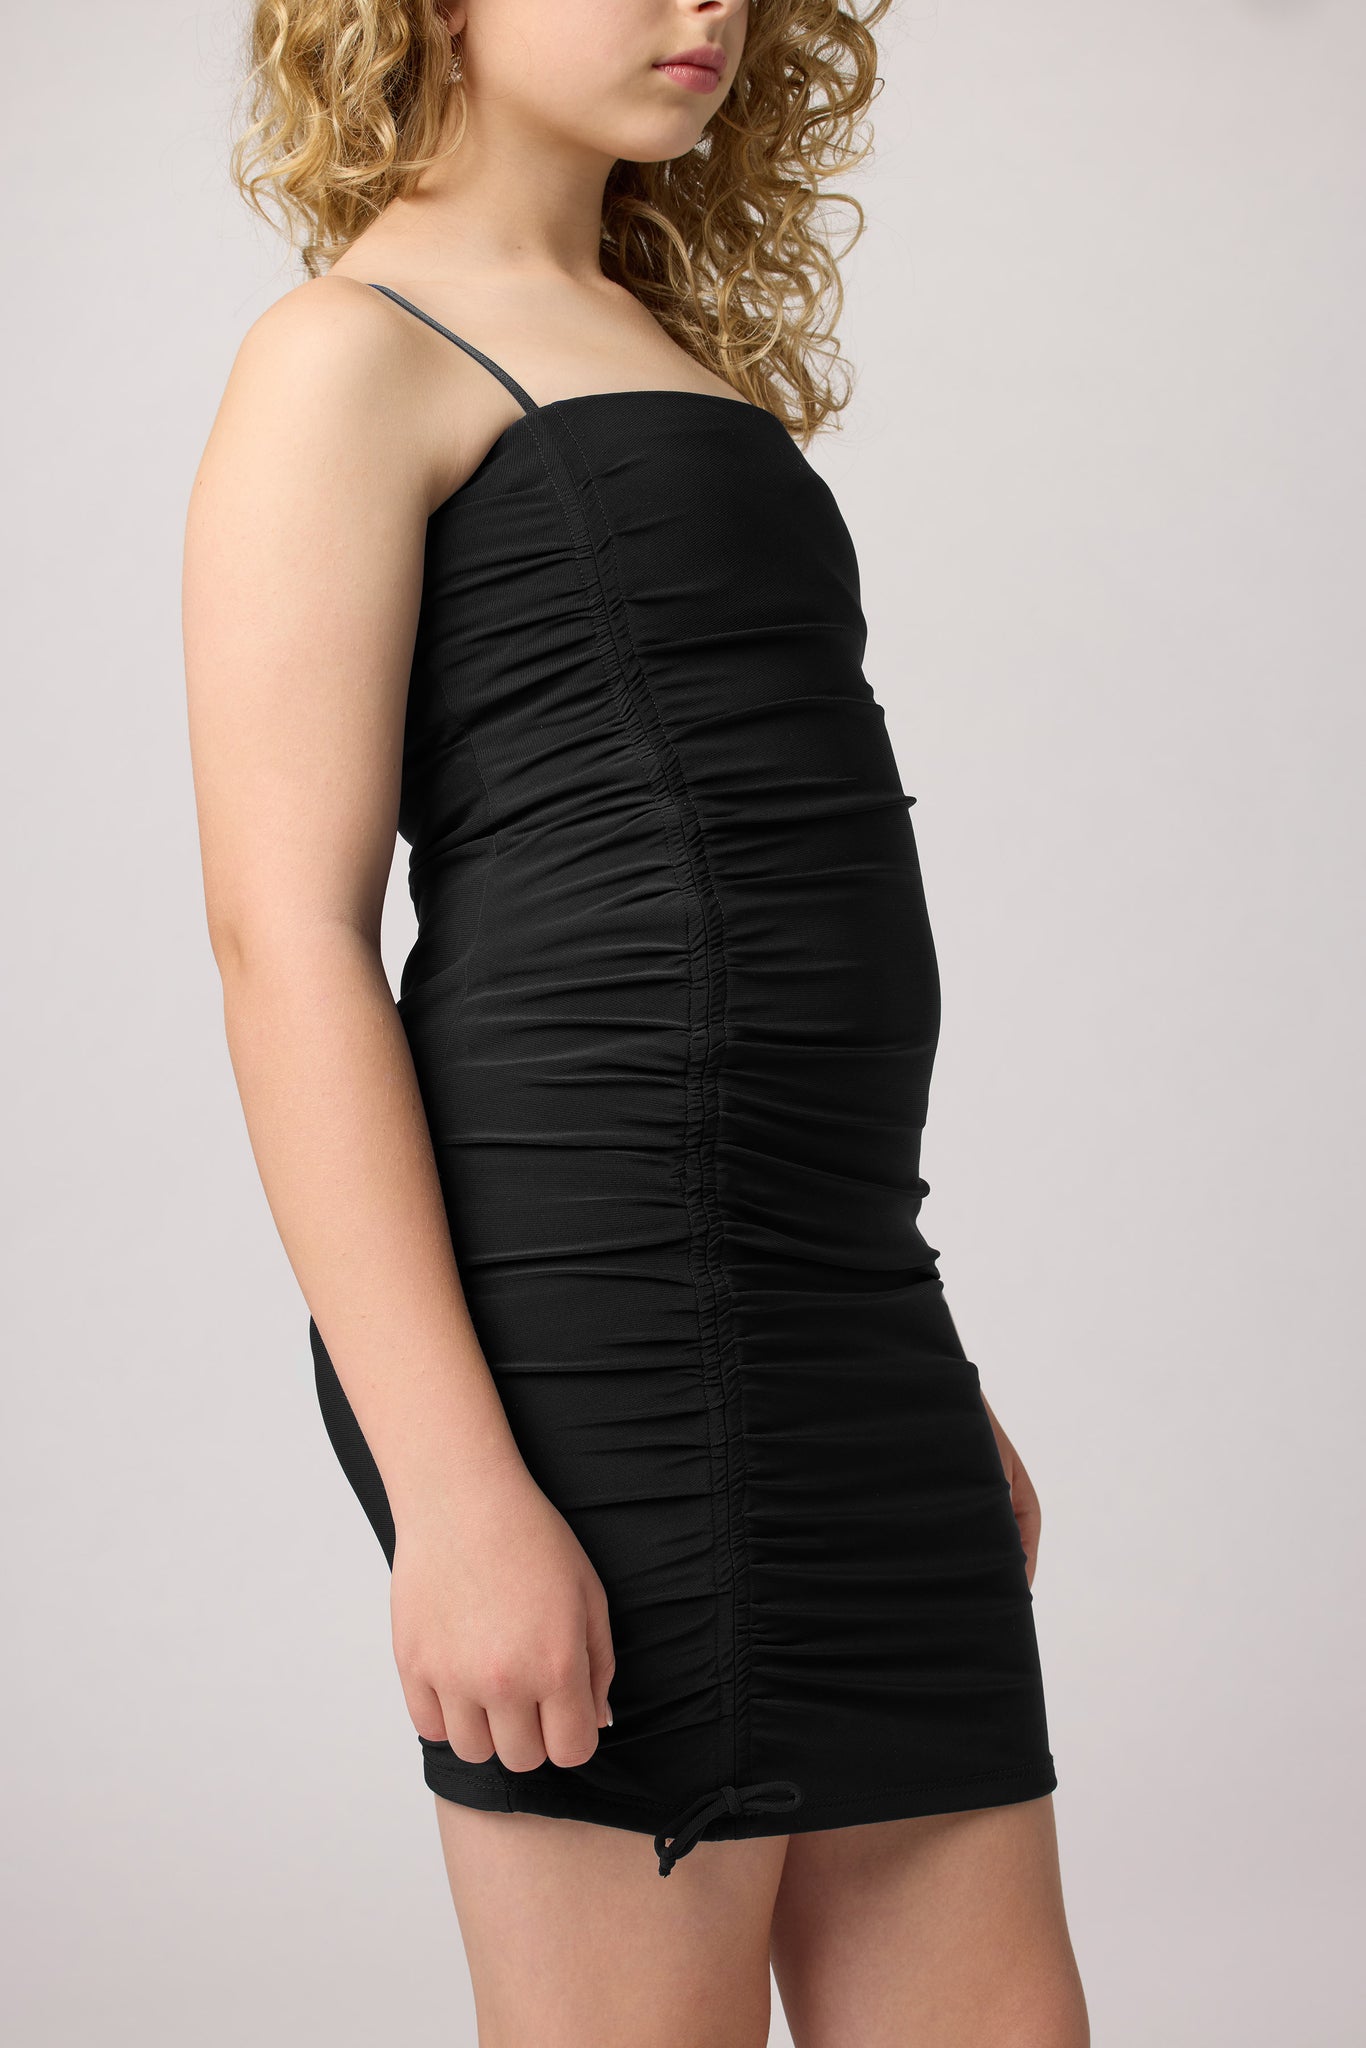 Blonde in an Un Deux Trois fitted ruched dress in black with nude heel.